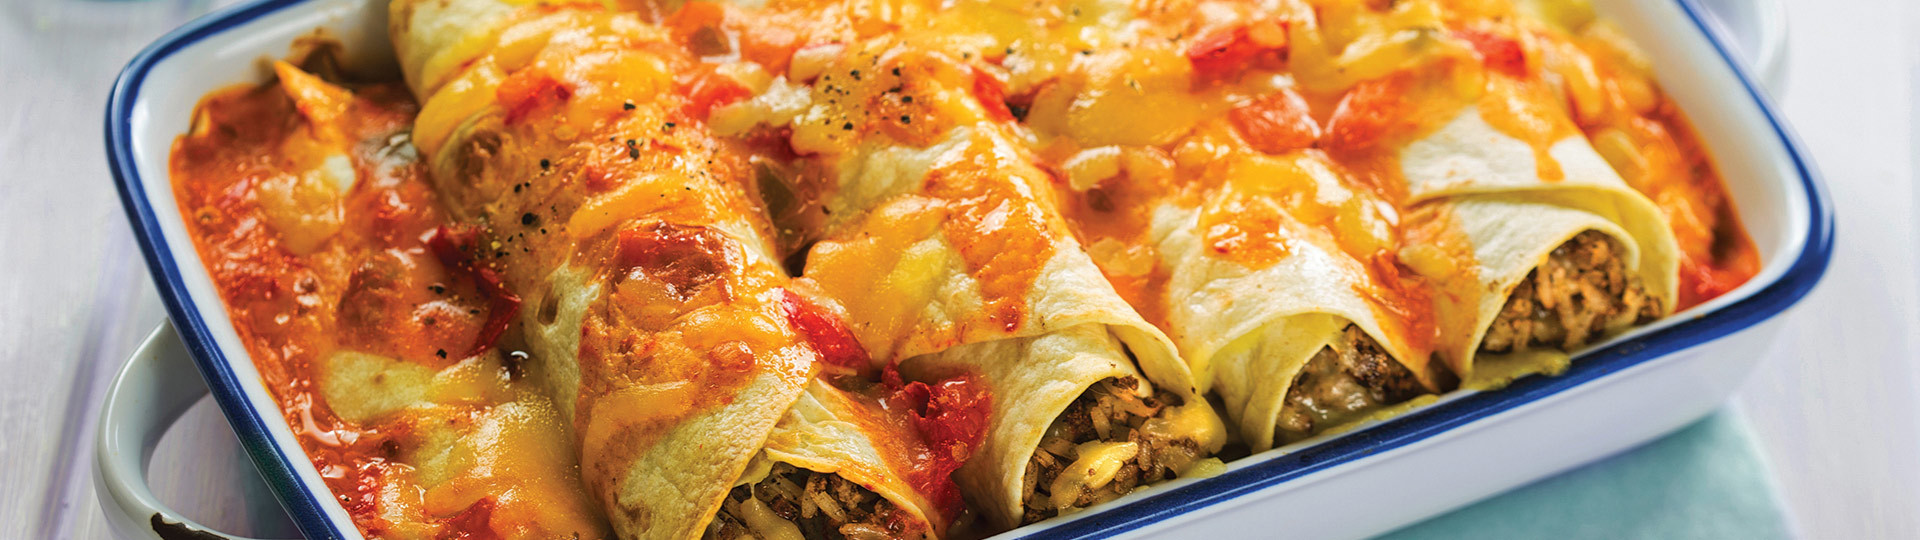 Enchilada dish with cheese and salsa topping.